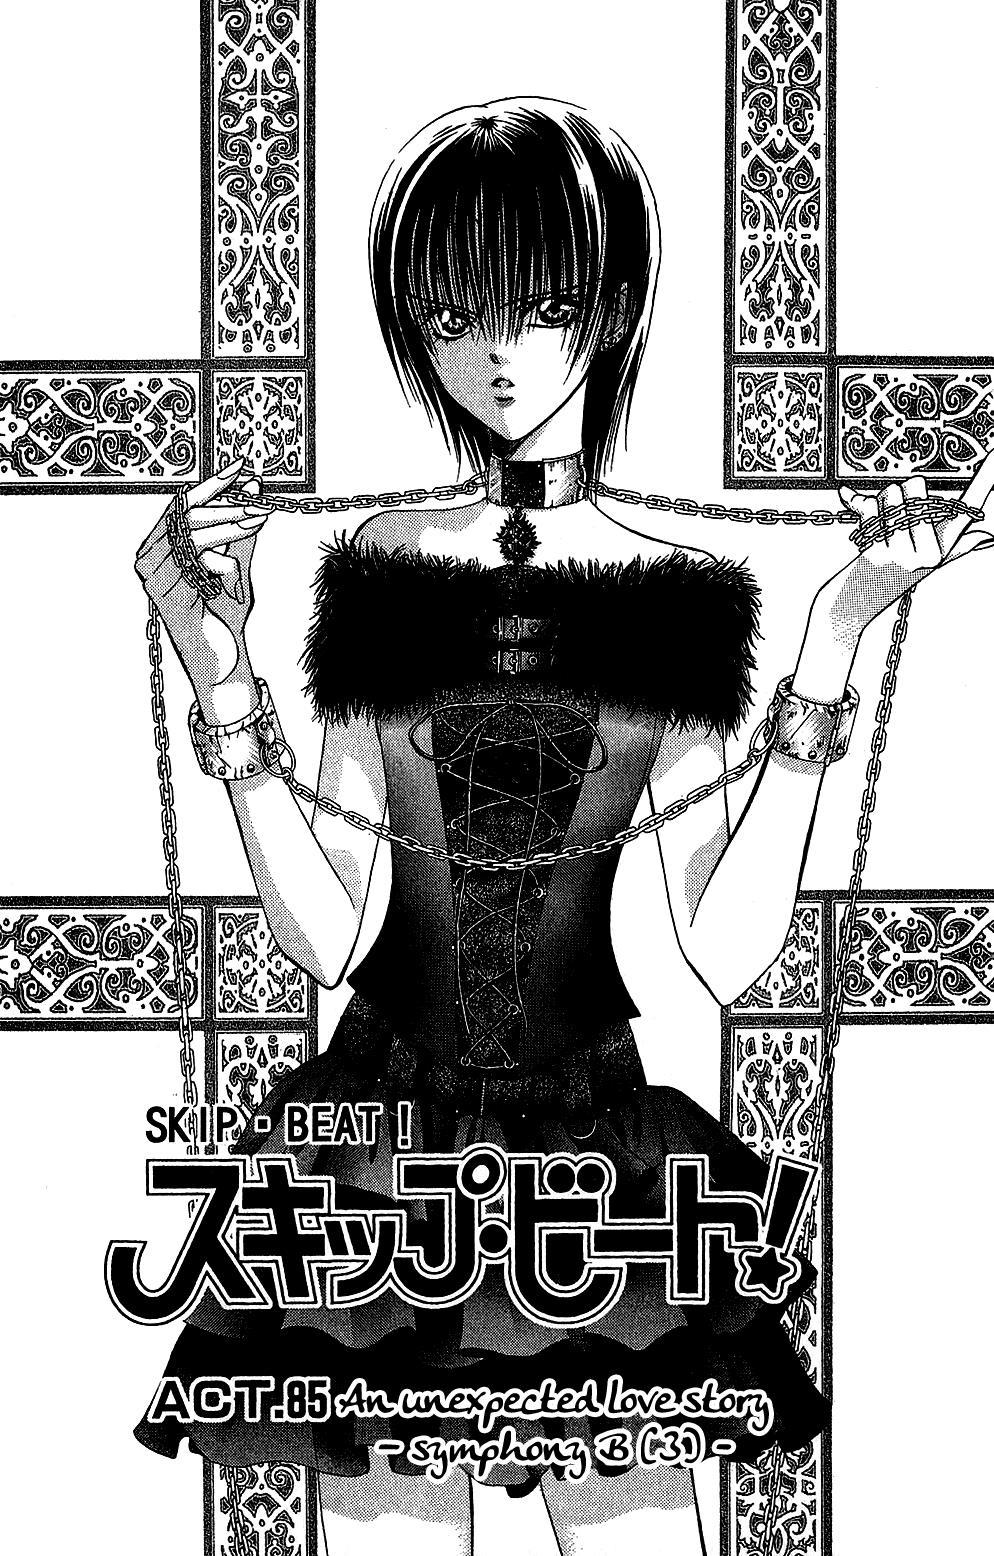 Skip Beat!, Chapter 85 Suddenly, a Love Story- Section B, Part 3 image 04